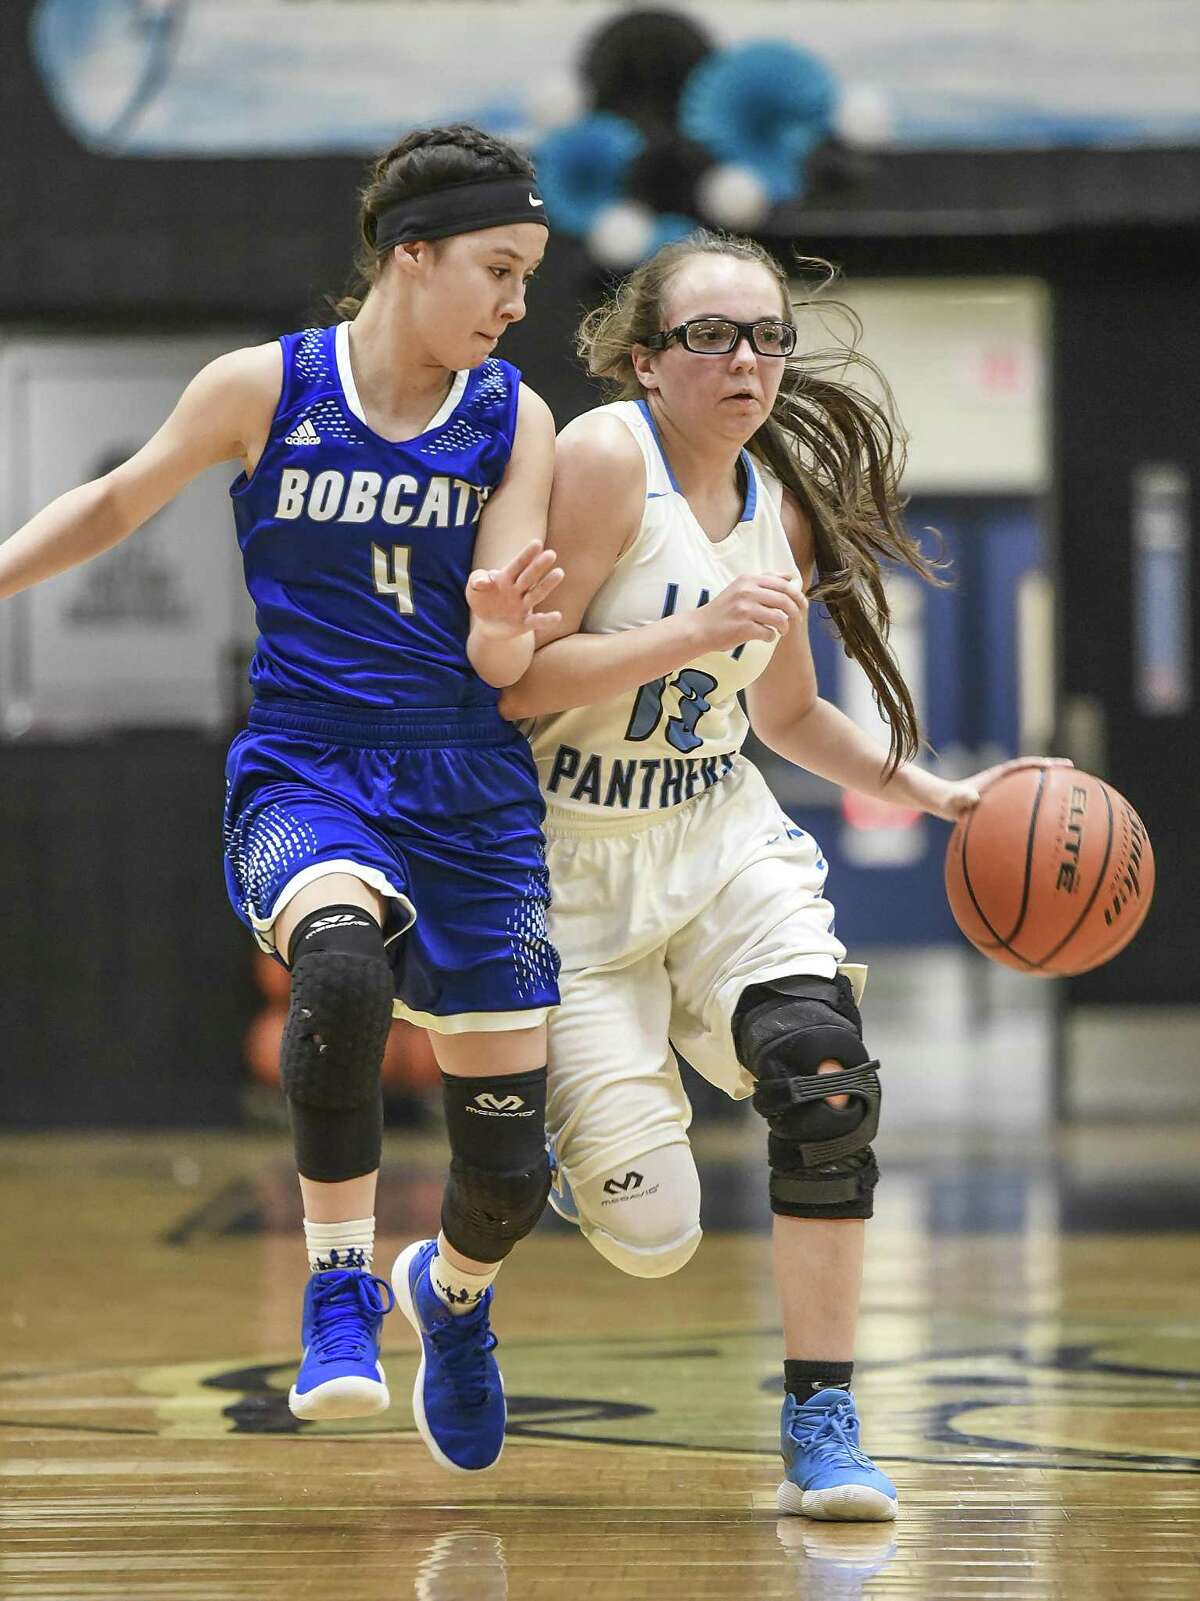 United South guard Stefanie Galindo scored 10 points as the Lady Panthers won 85-78 over South San to advance to the regional quarterfinals of the postseason. She was one of five in double figures.